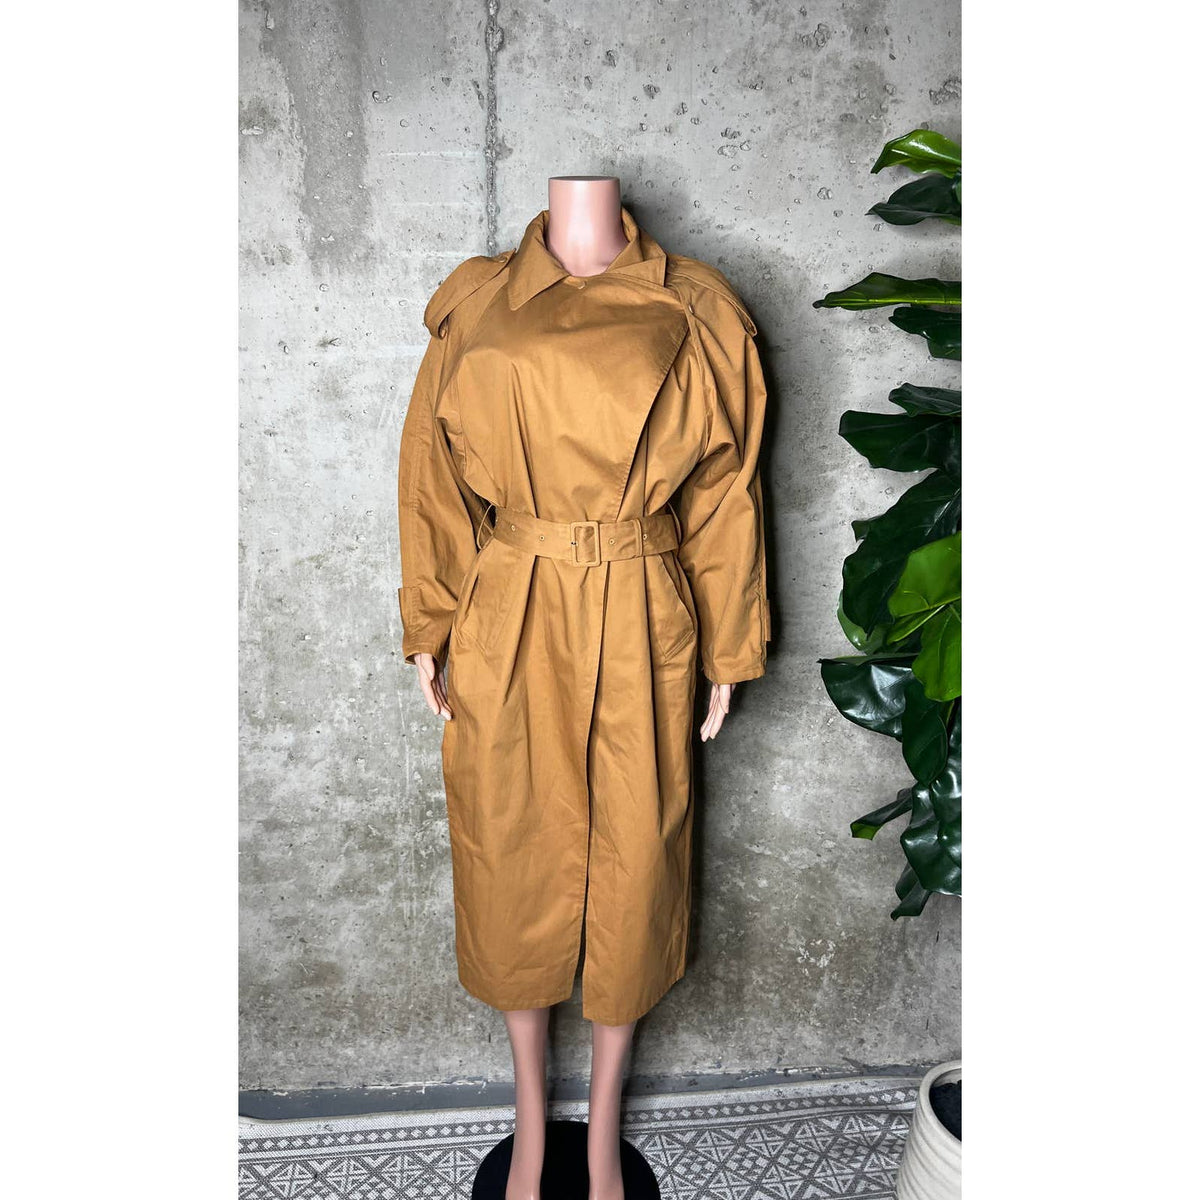 Frankies Shop Brown Trench Coat One Size